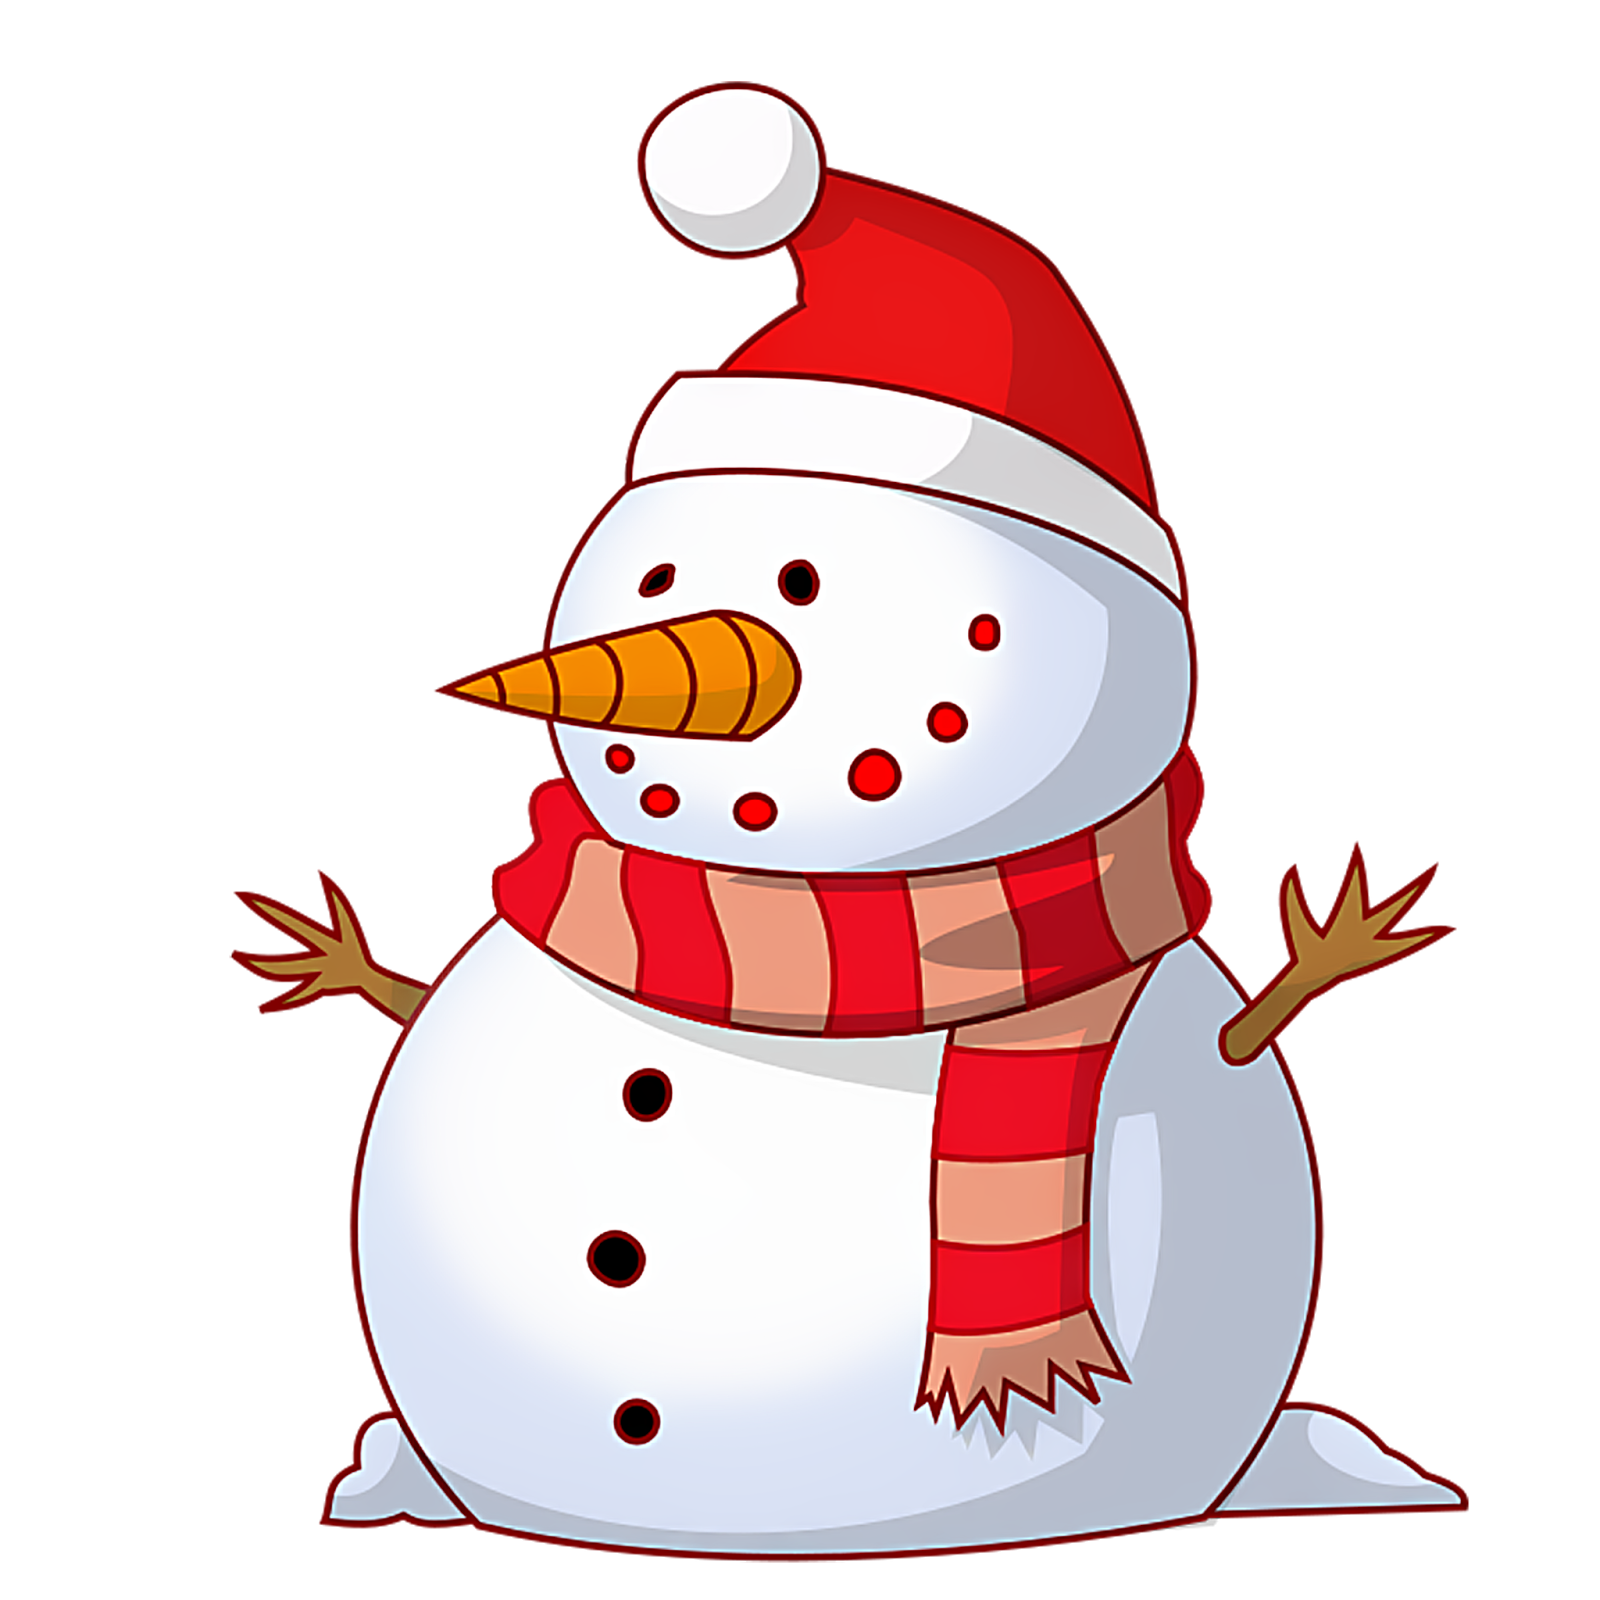 Merry Christmas Snowman Clipart Hd For Wallpapers And Cards Hd In Png